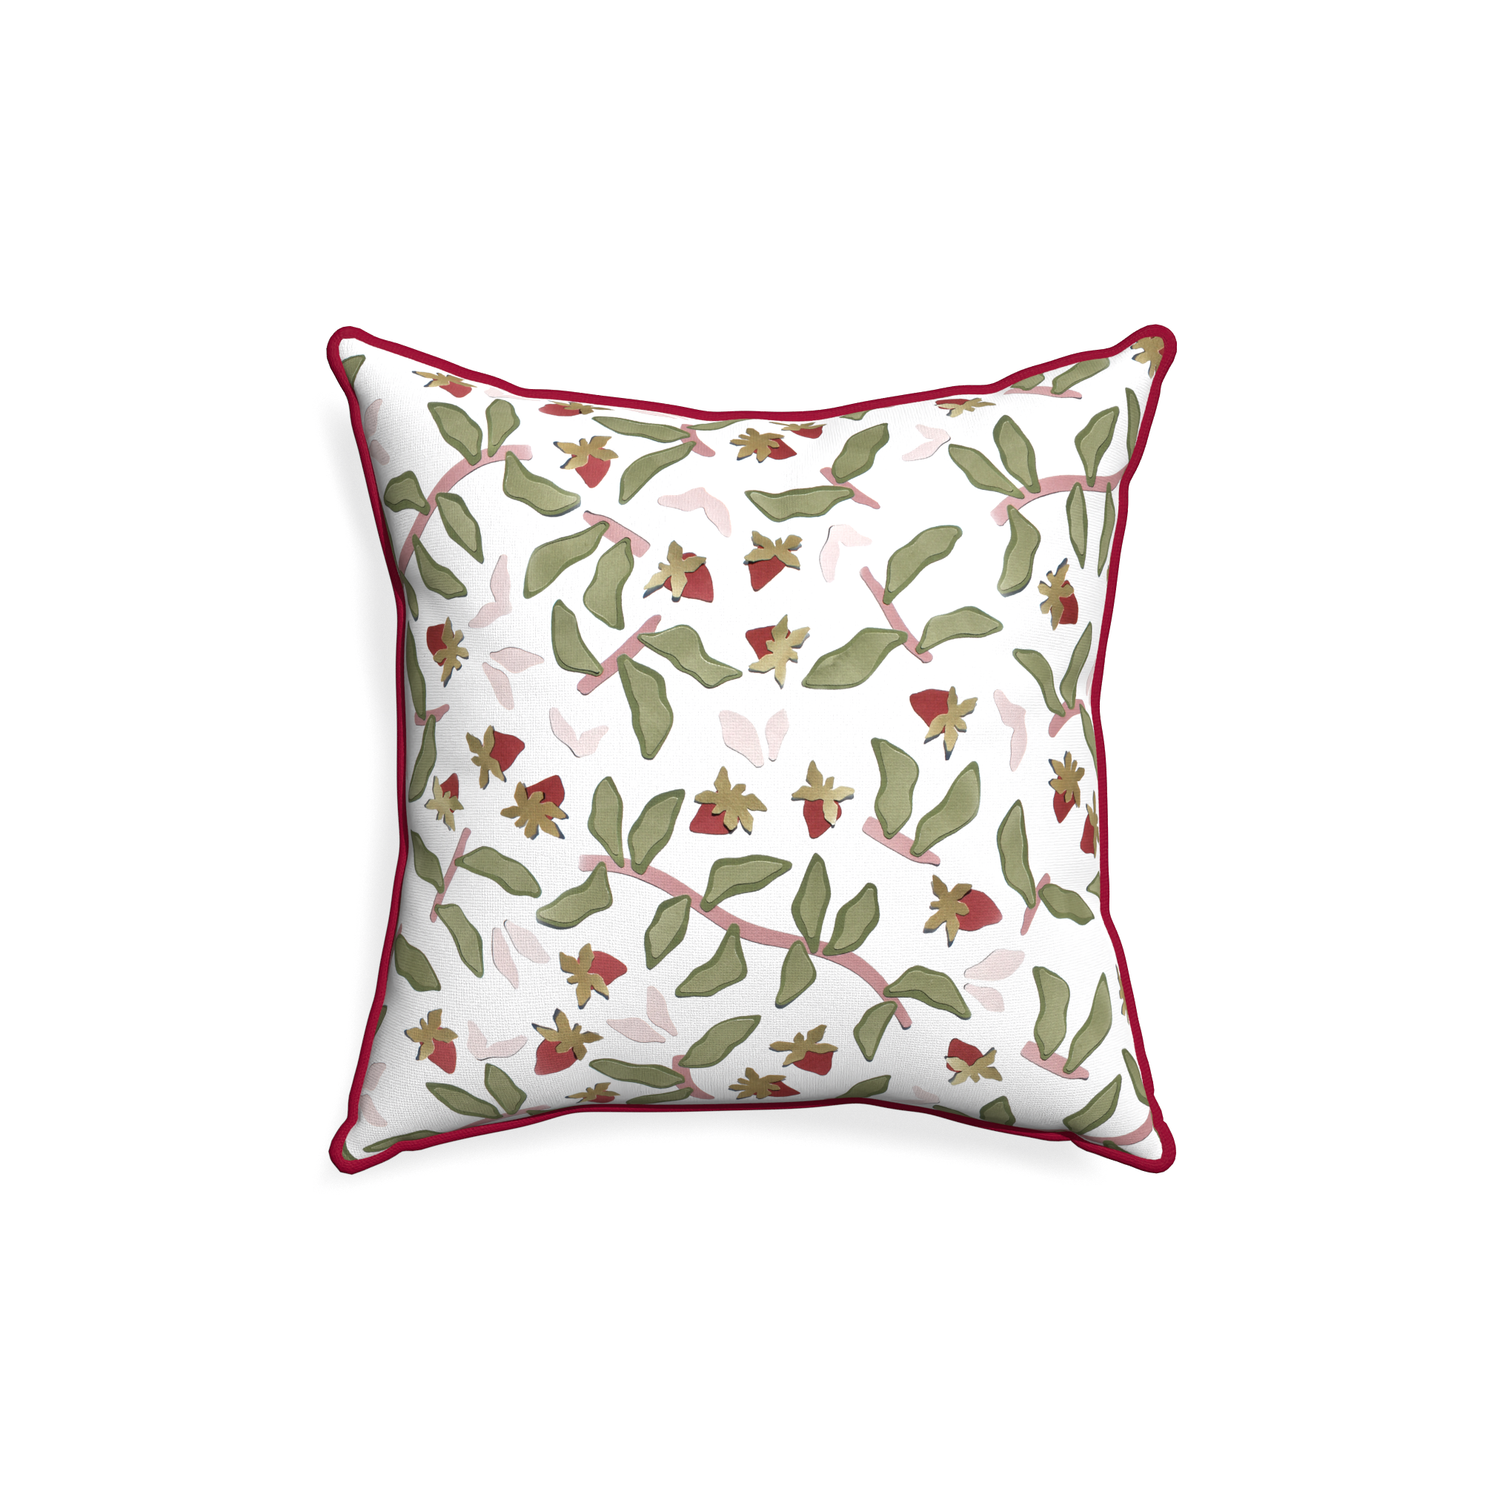 18-square nellie custom strawberry & botanicalpillow with raspberry piping on white background